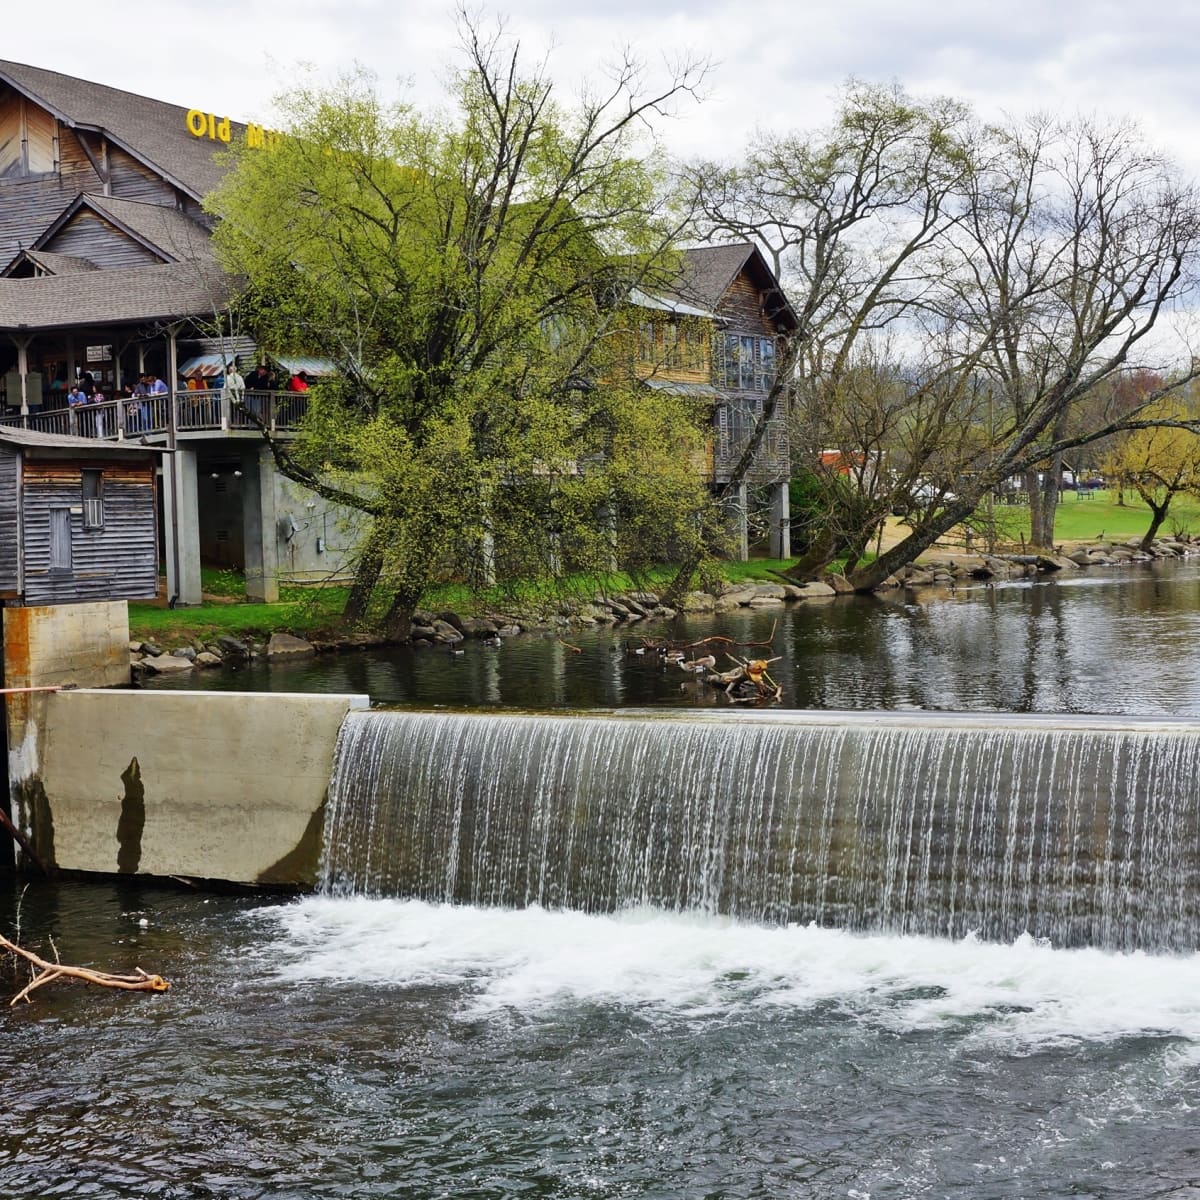 6 Fun Things to Do in Pigeon Forge and Gatlinburg